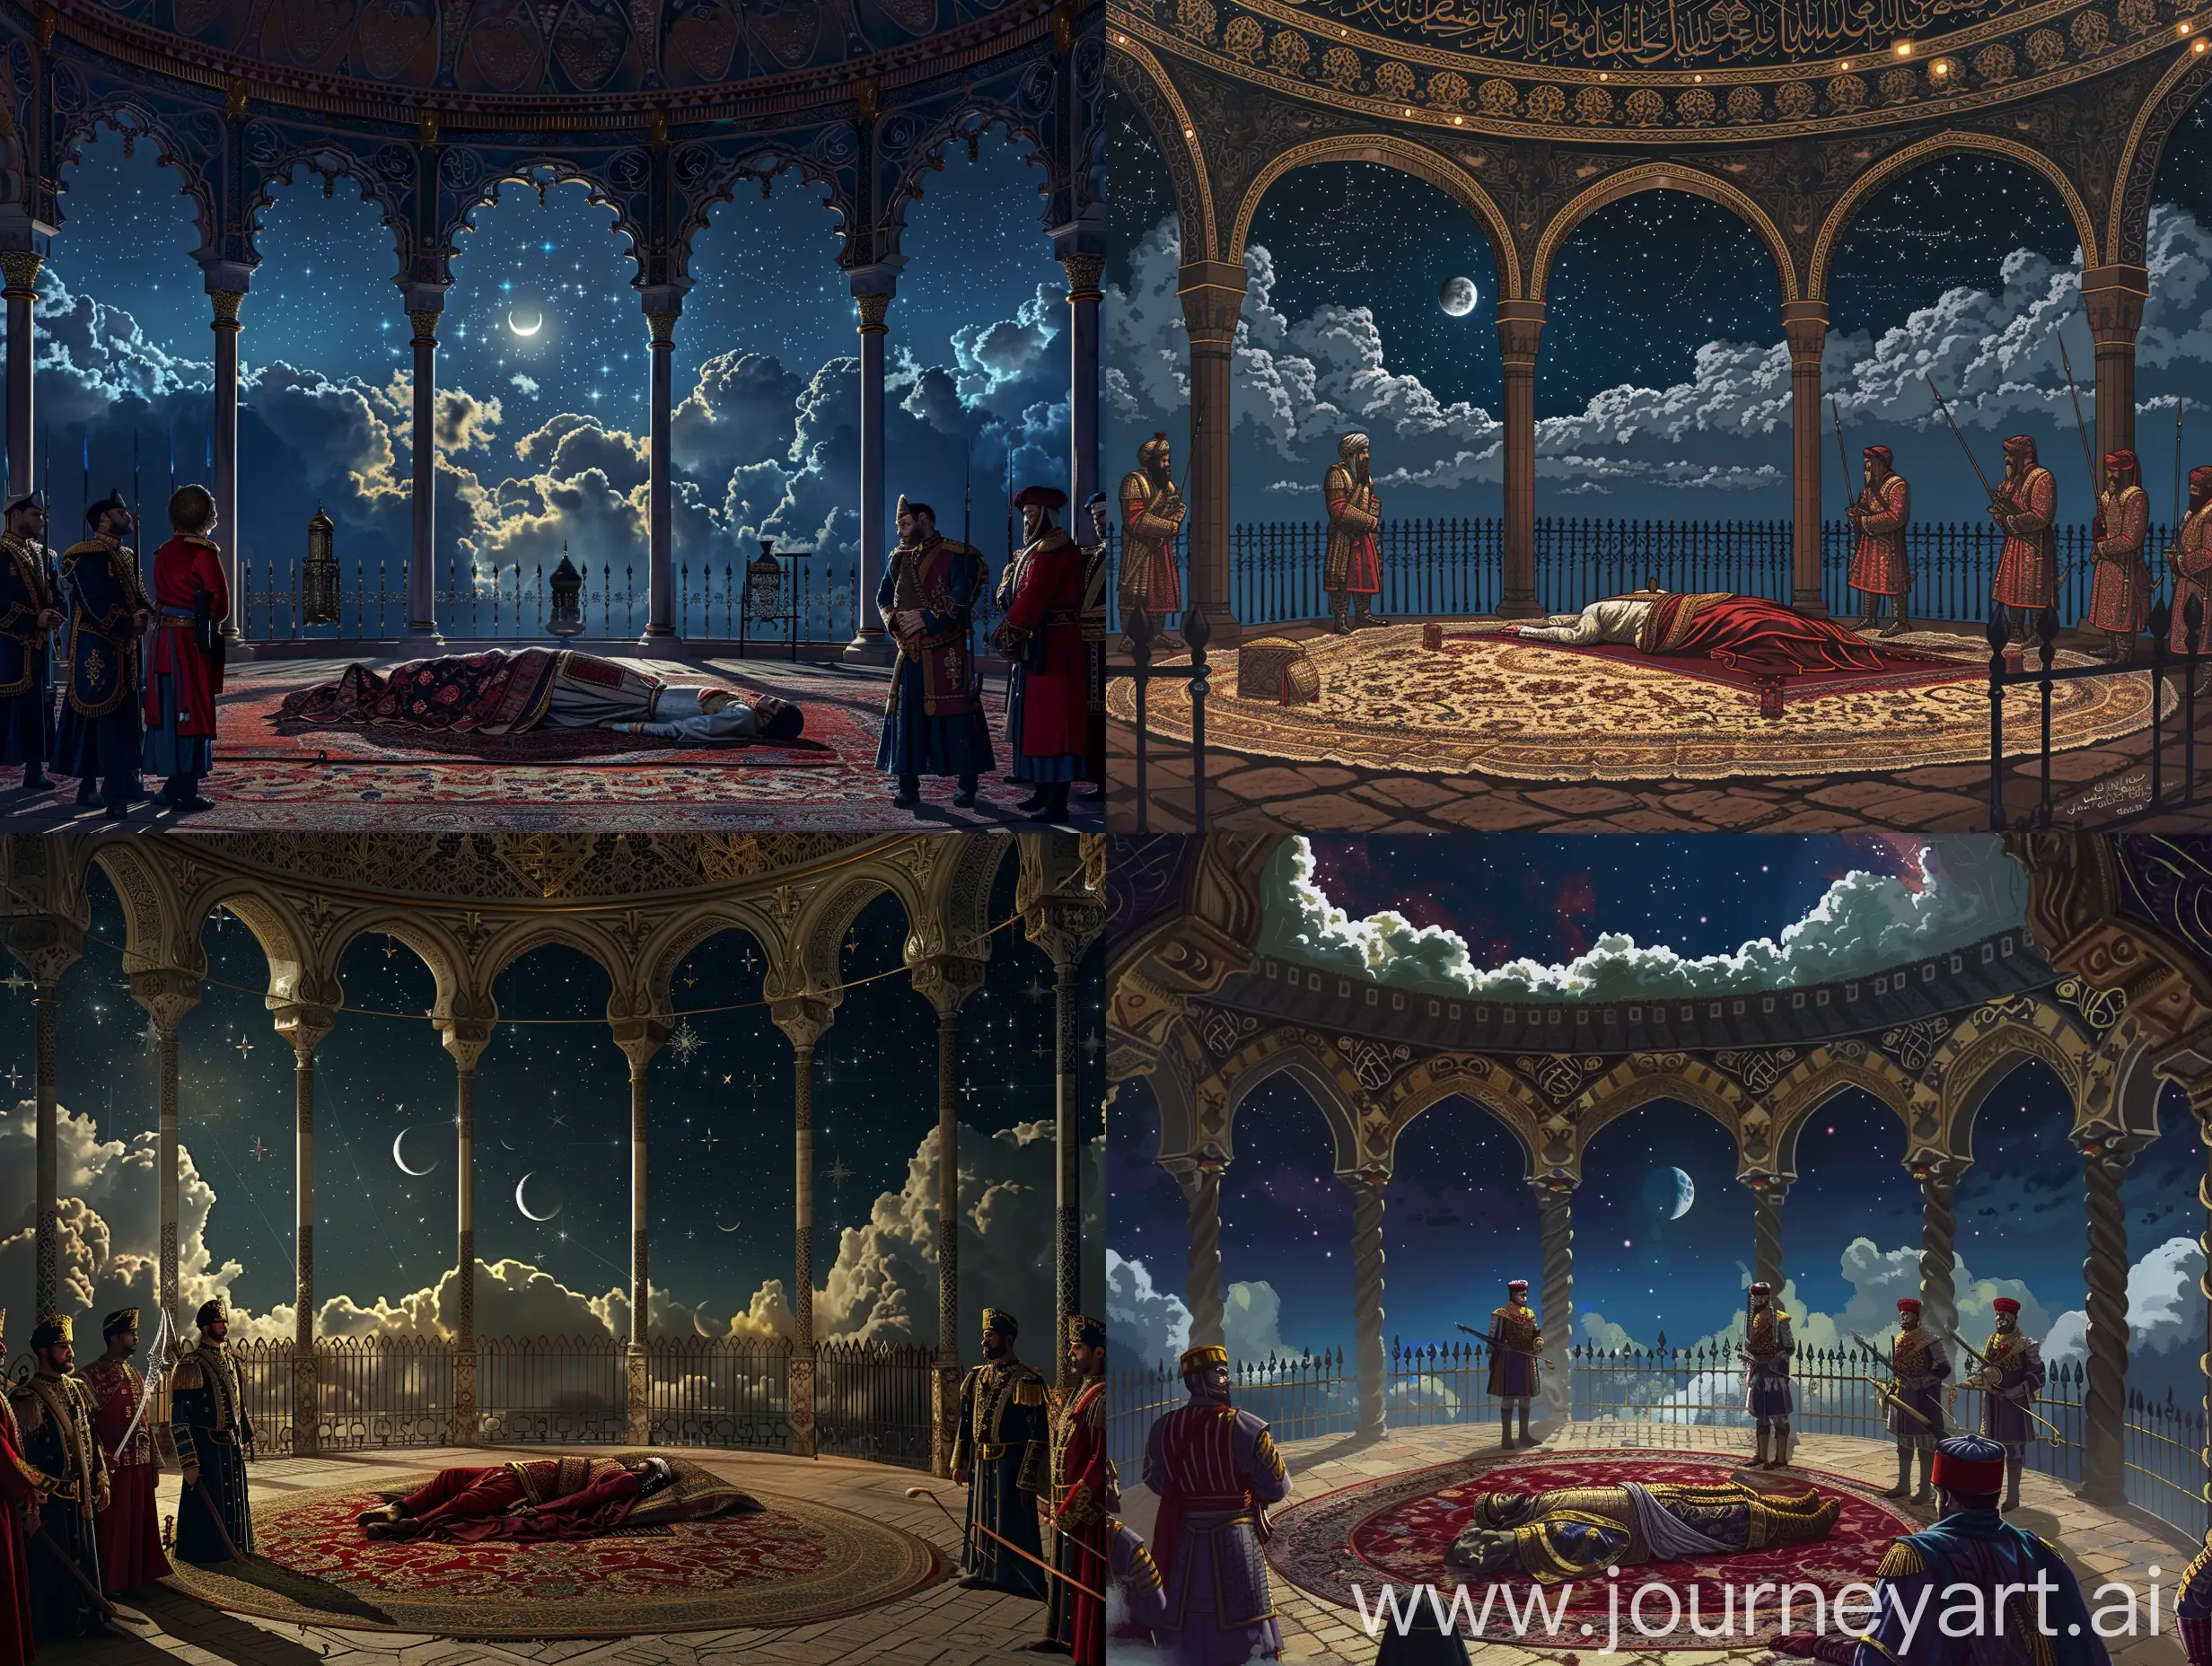 inside of a round isolated hall covered with muqarnas ceiling, at high place having islamic fencing at border, a dead prince lying on the persian carpet surrounded by ottoman guards wearing janissary uniform, Persian arches in the background, night view of clouds and stars and moon outside the arches